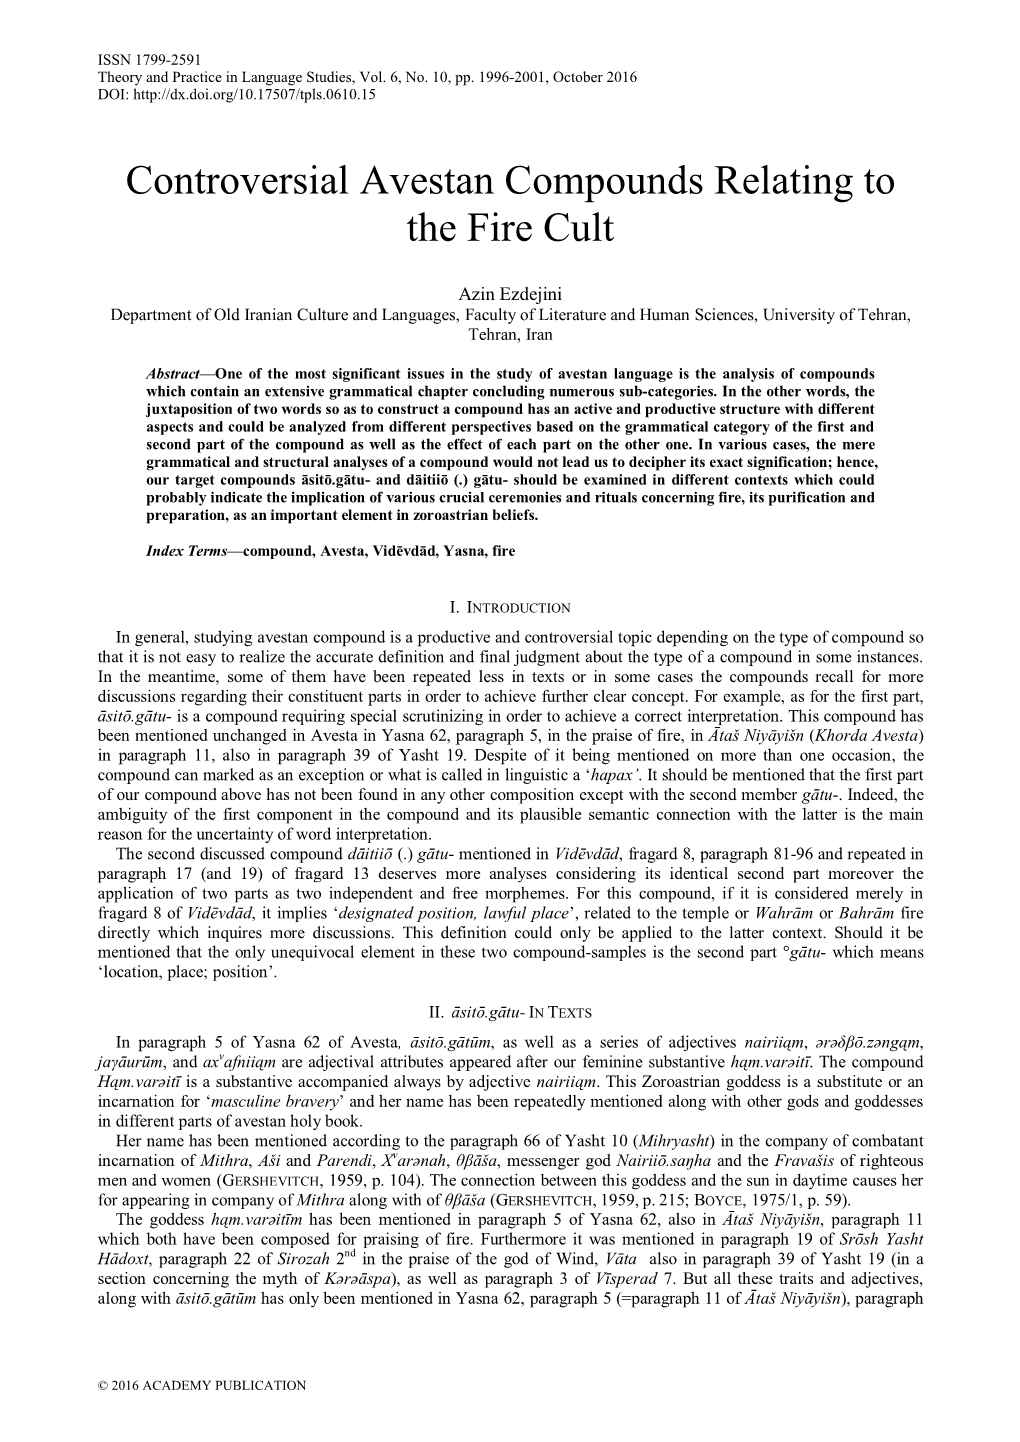 Controversial Avestan Compounds Relating to the Fire Cult